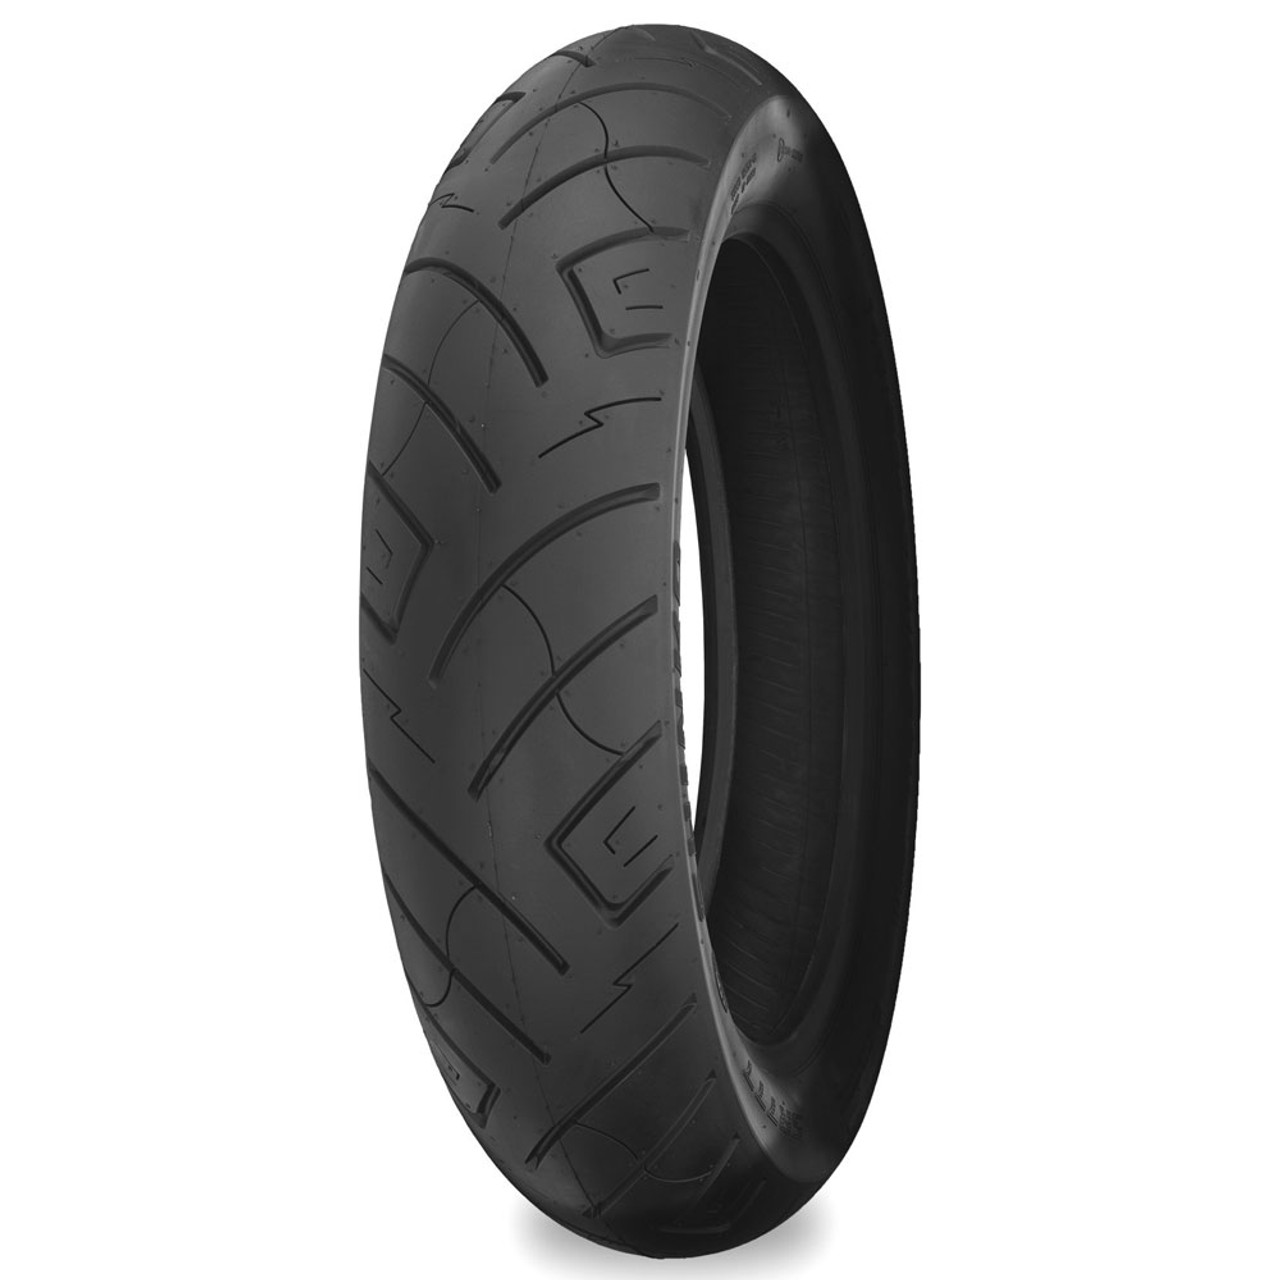 Shinko SR777 H.D. Front Tire - 180/65-16 - 87-4599 - Get Lowered 